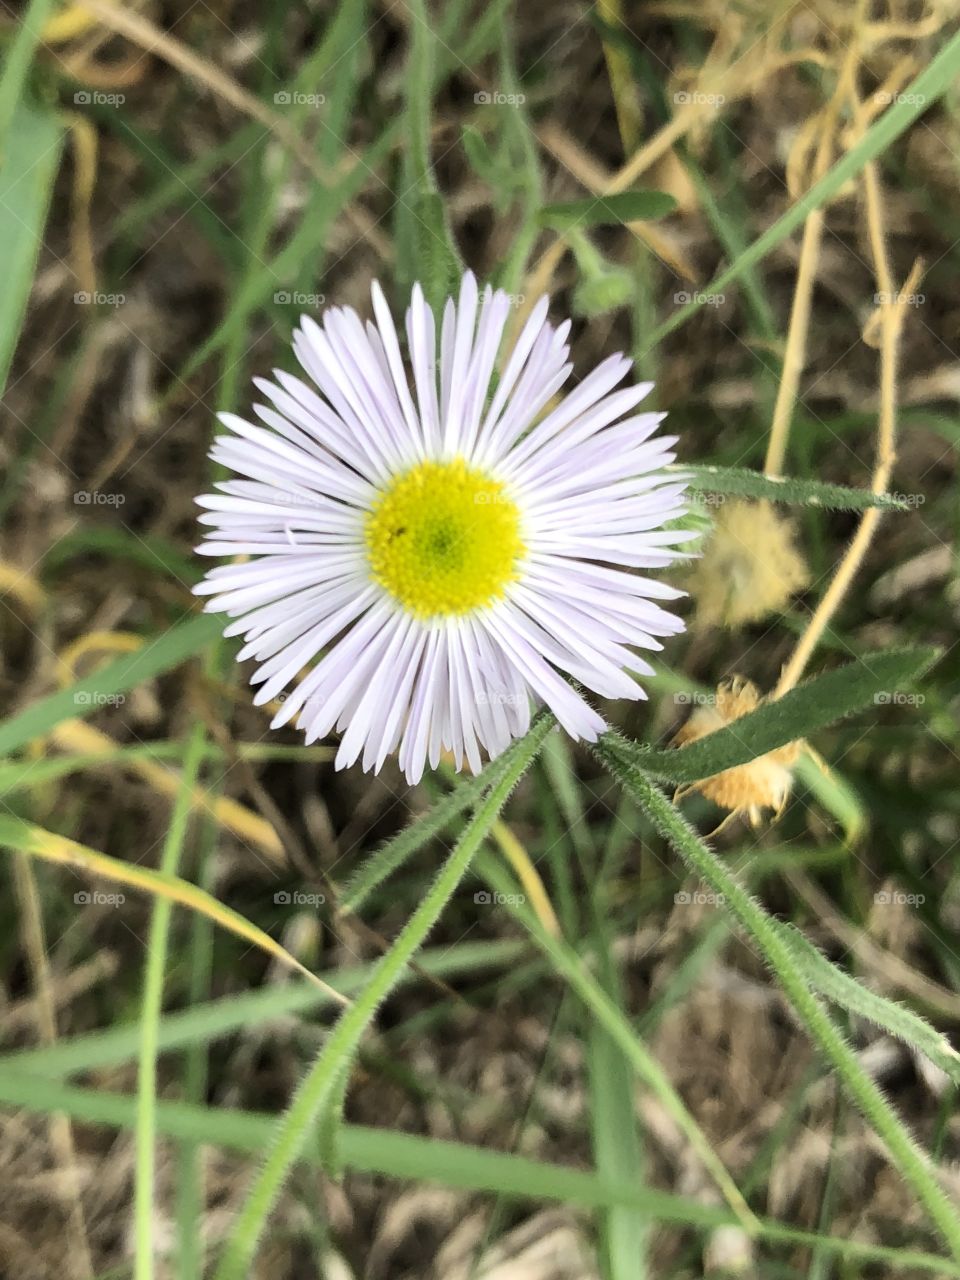 Tiny beautiful flower from a weed